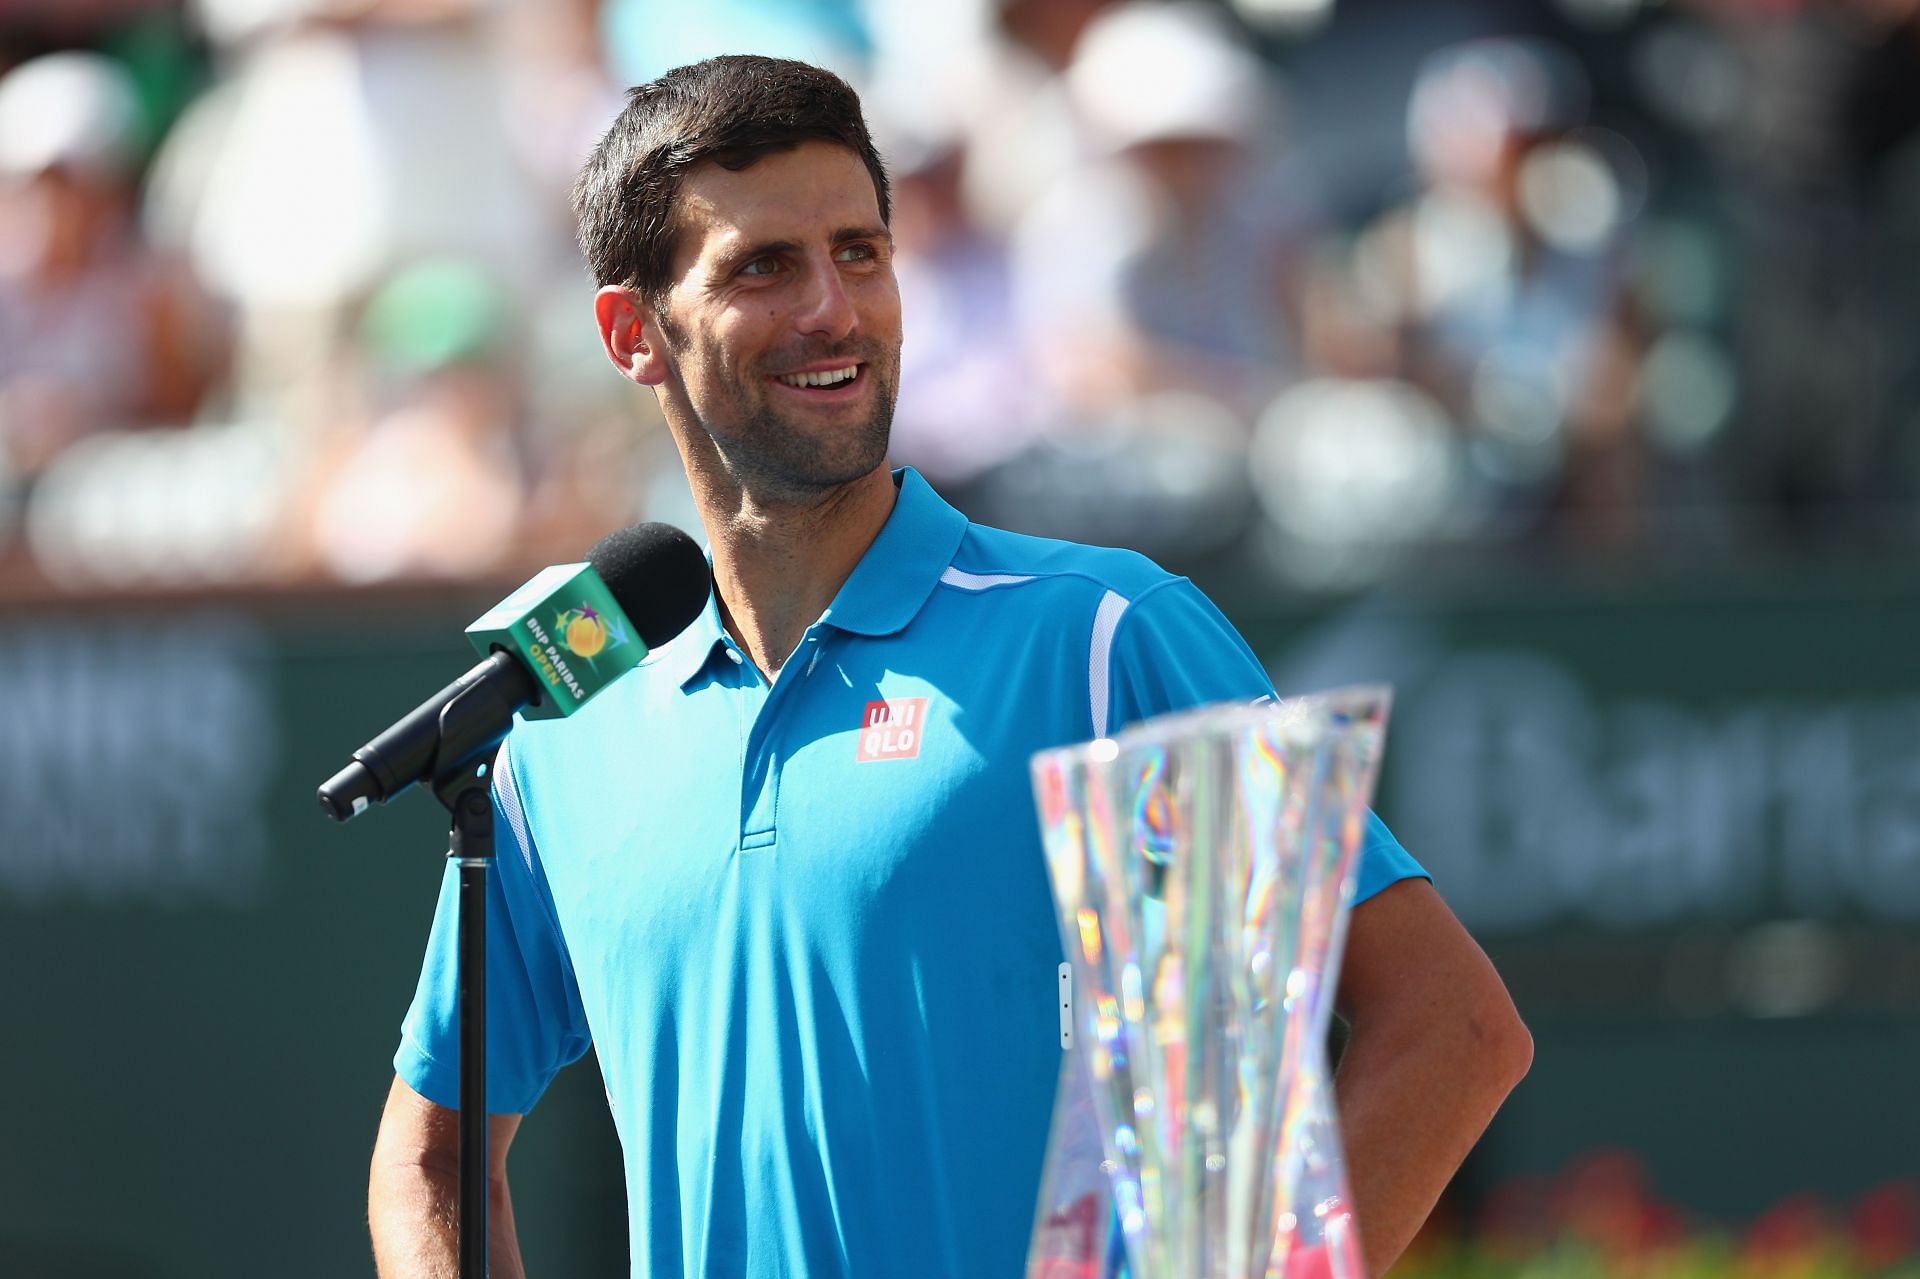 Novak Djokovic&#039;s future in most tournaments across the year is up in the air at the moment